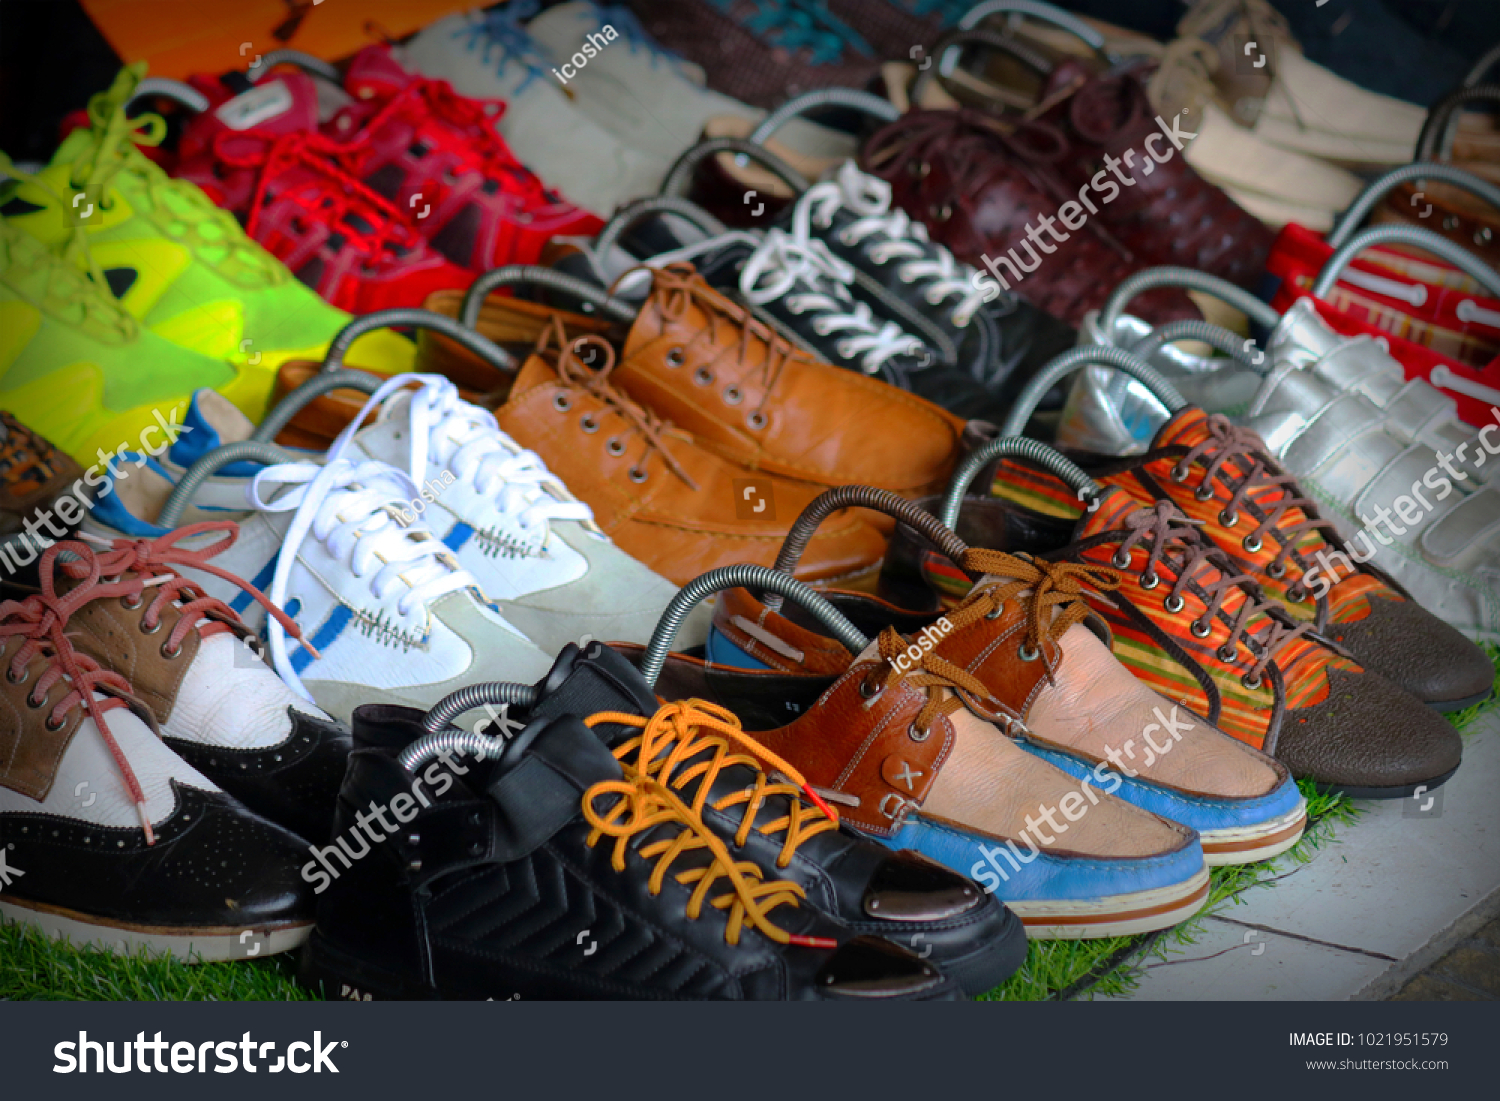 sell second hand shoes